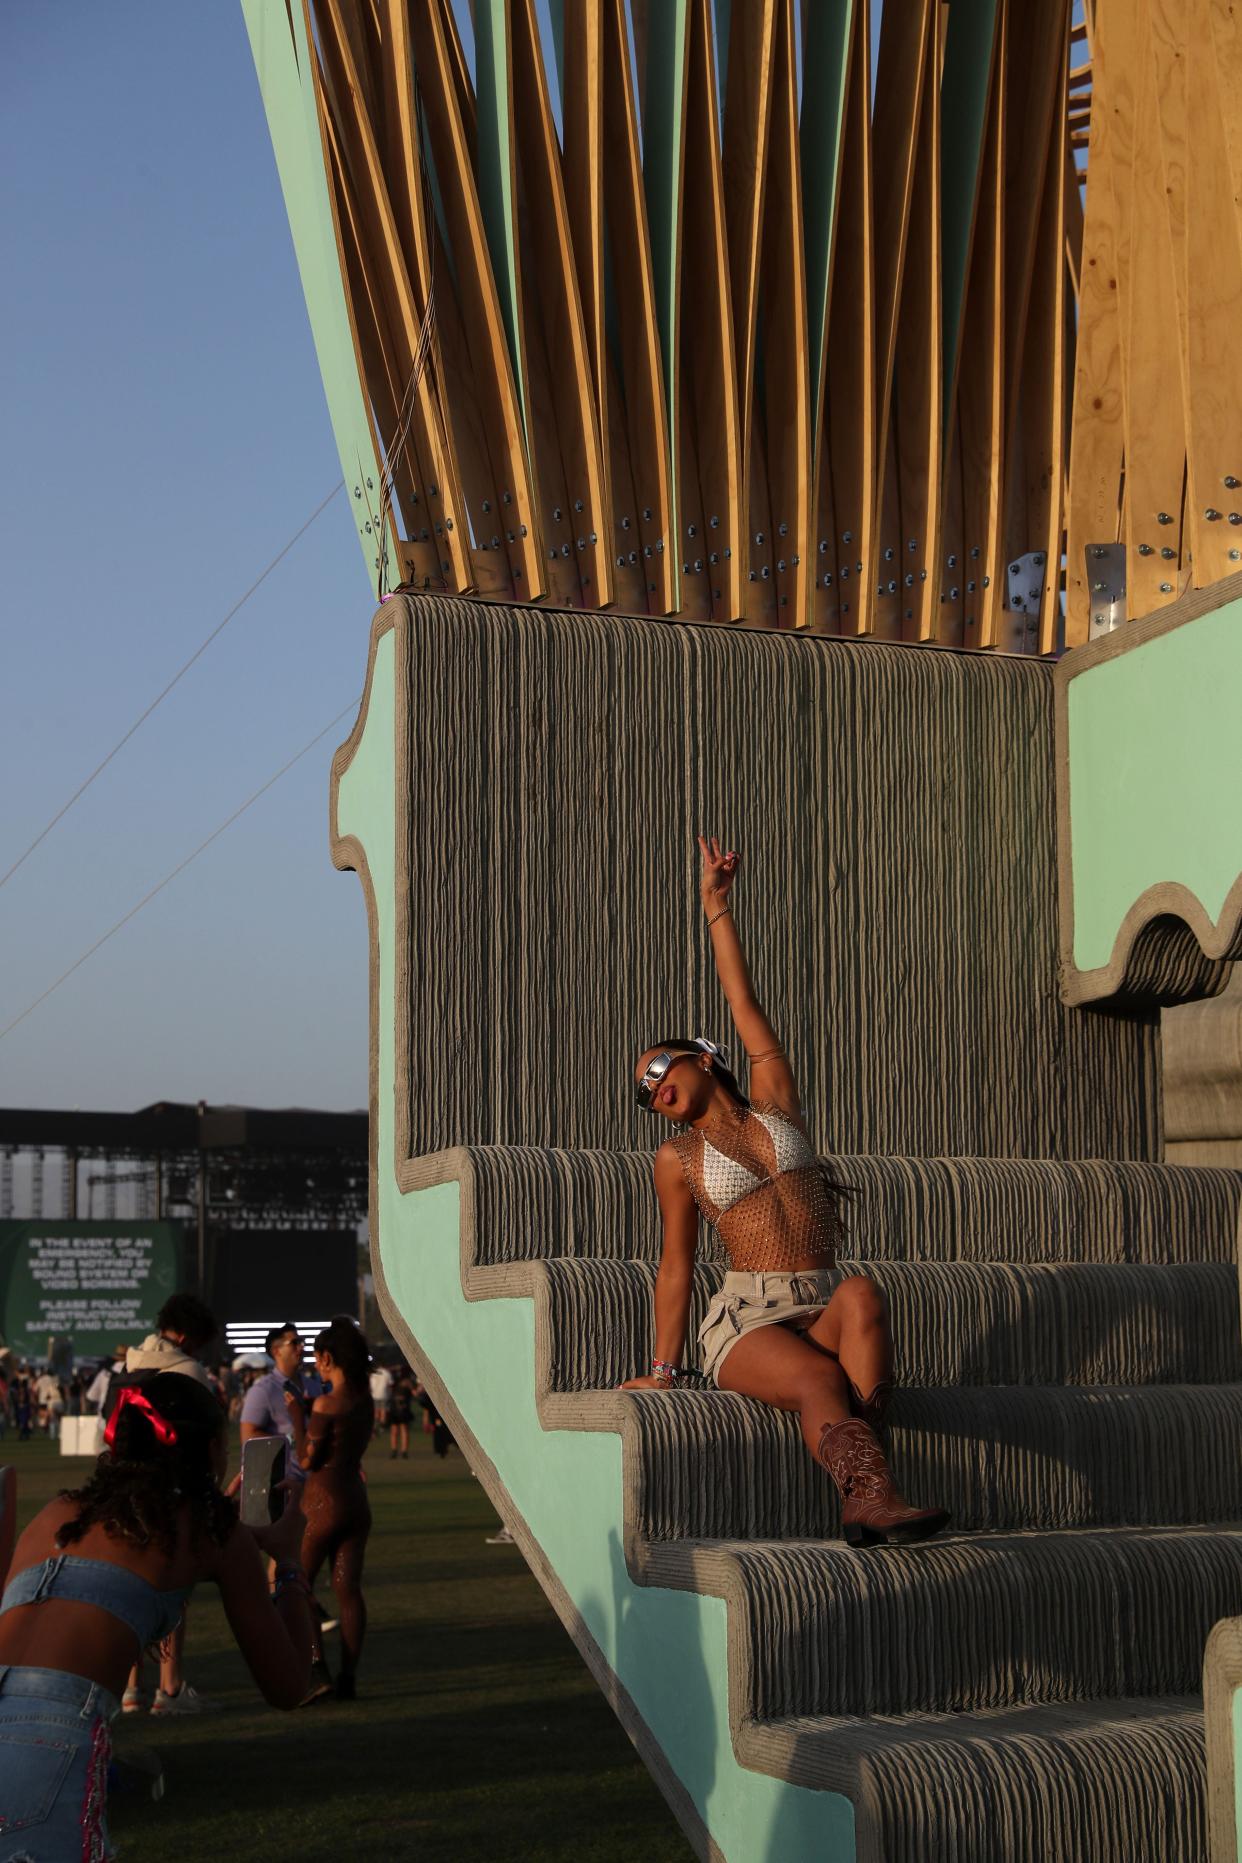 Festival goers take photos on the Monarchs: A House in Six Parts by Hannah at the Empire Polo Club during the Coachella Music and Arts Festival in Indio, Calif., on Friday.